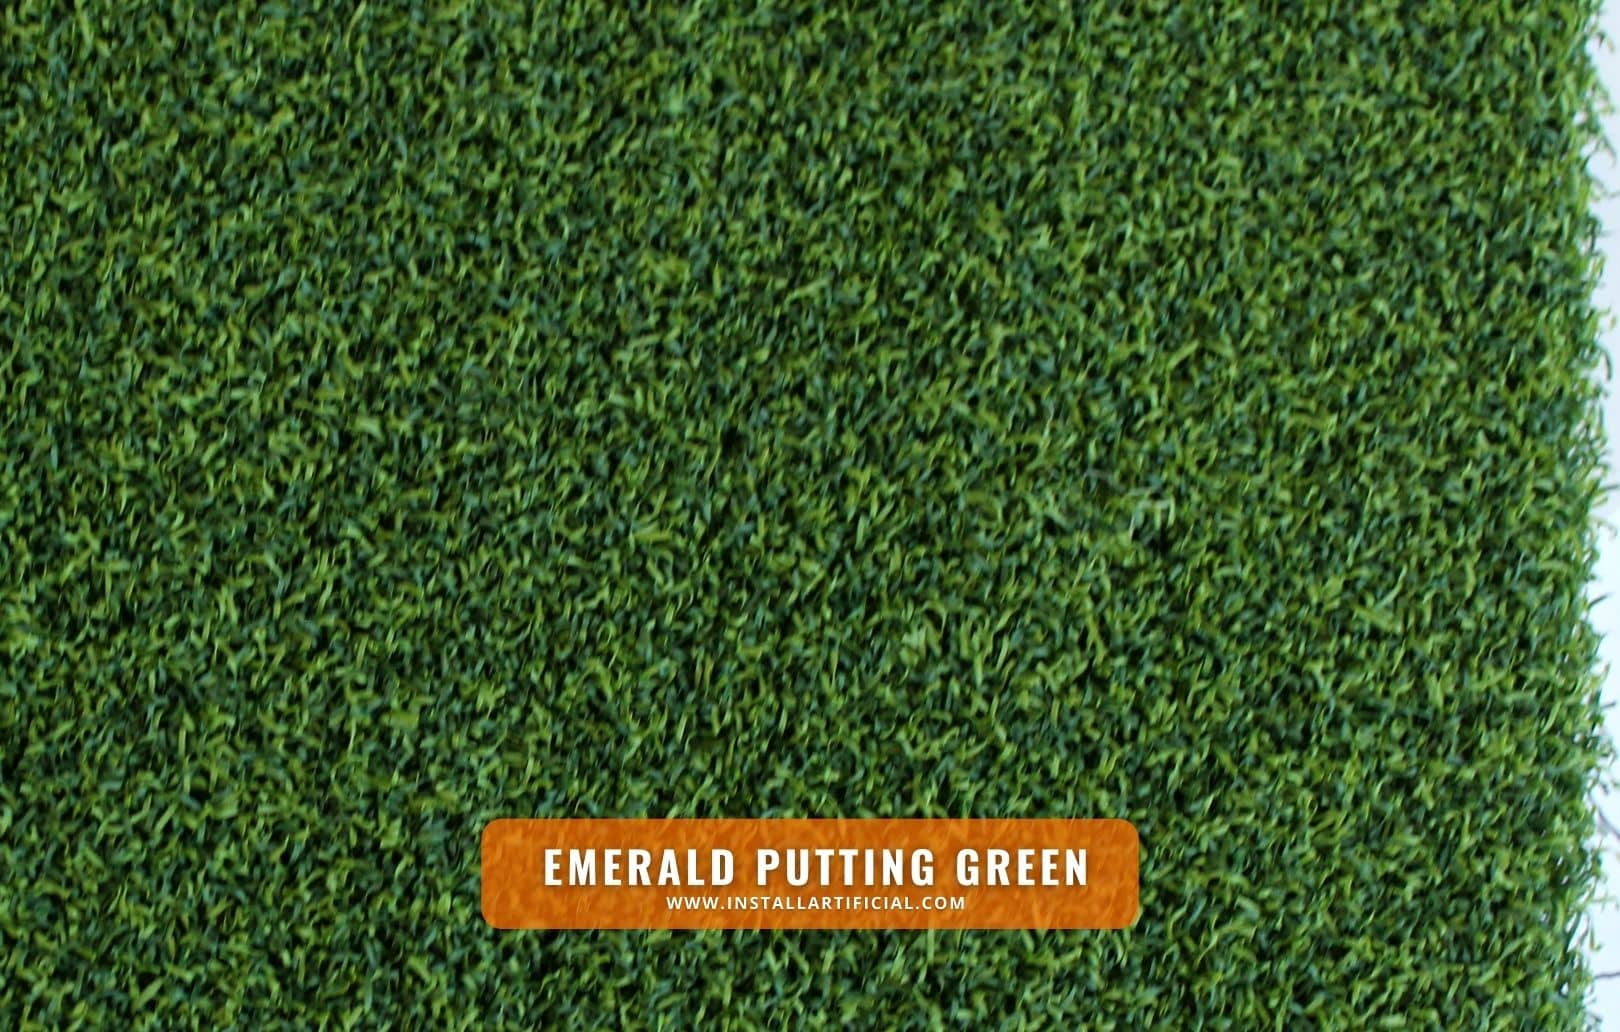 Emerald Putting Green, Purchase Green, top